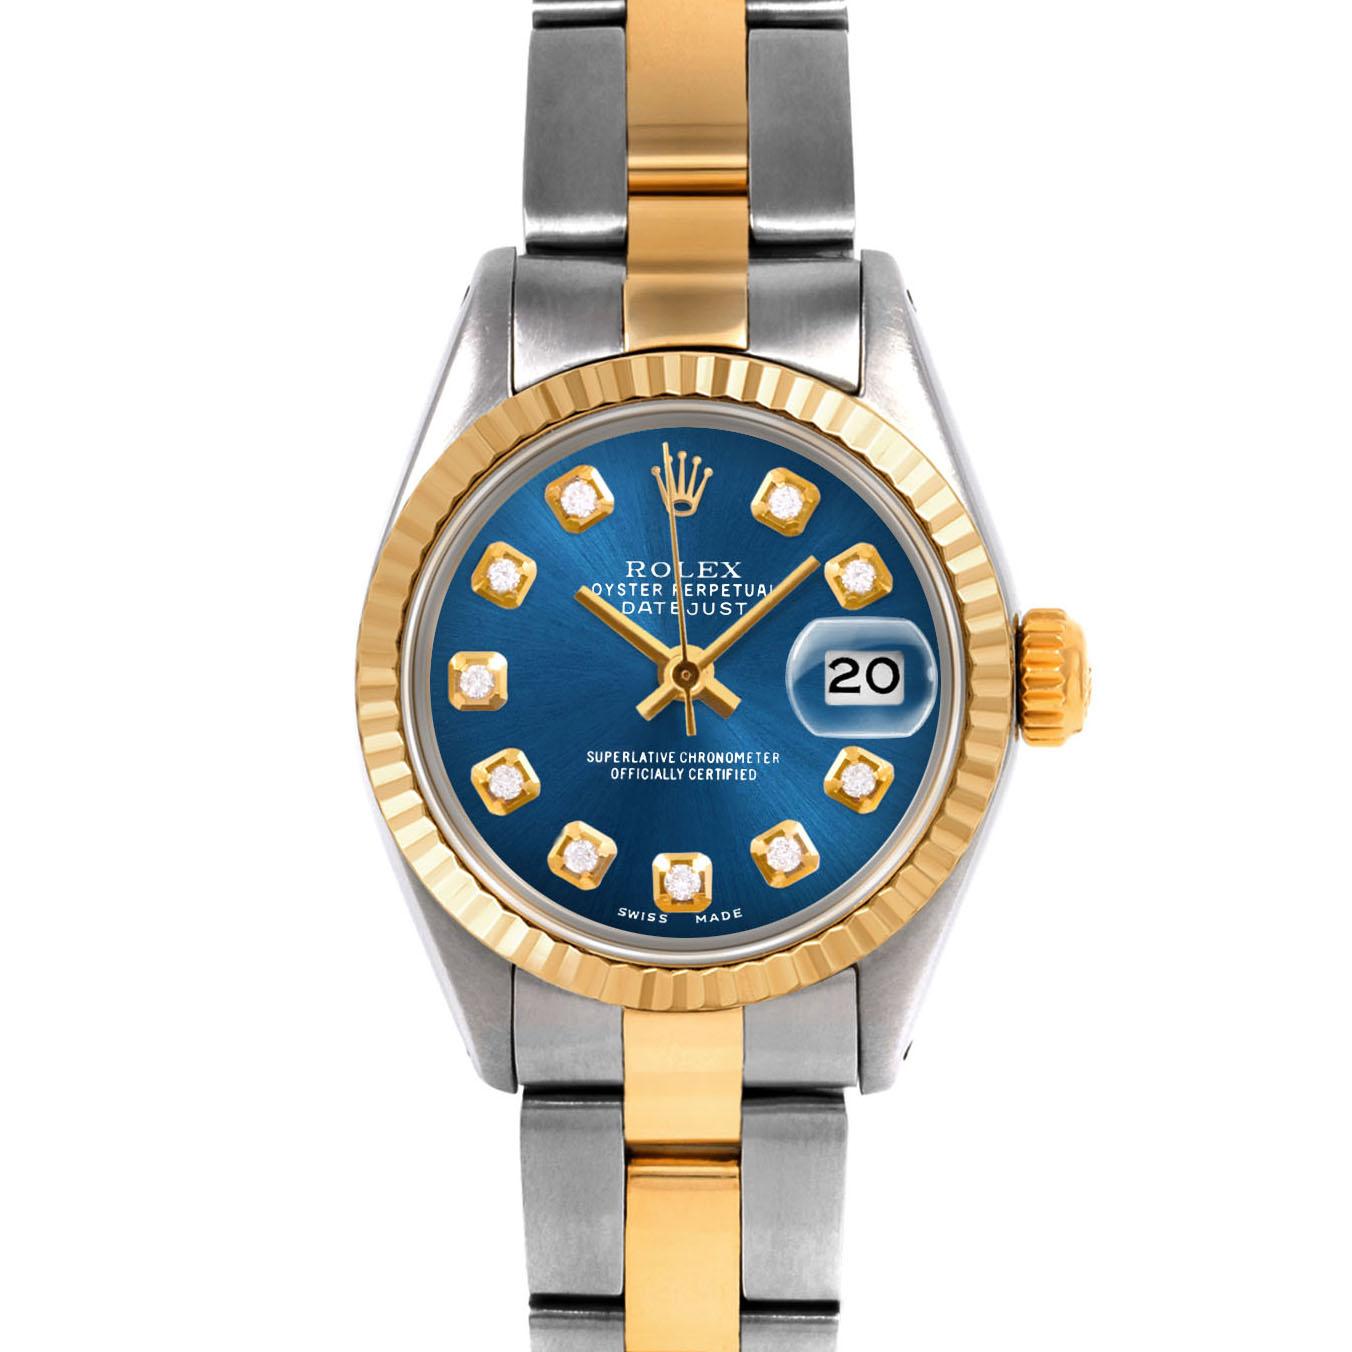 Swiss Wrist - SKU 6917-TT-BLU-DIA-AM-FLT-OYS

Brand : Rolex
Model : Datejust (Non-Quickset Model)
Gender : Ladies
Metals : 14K/Stainless Steel
Case Size : 26 mm

Dial : Custom Blue Diamond Dial (This dial is not original Rolex And has been added